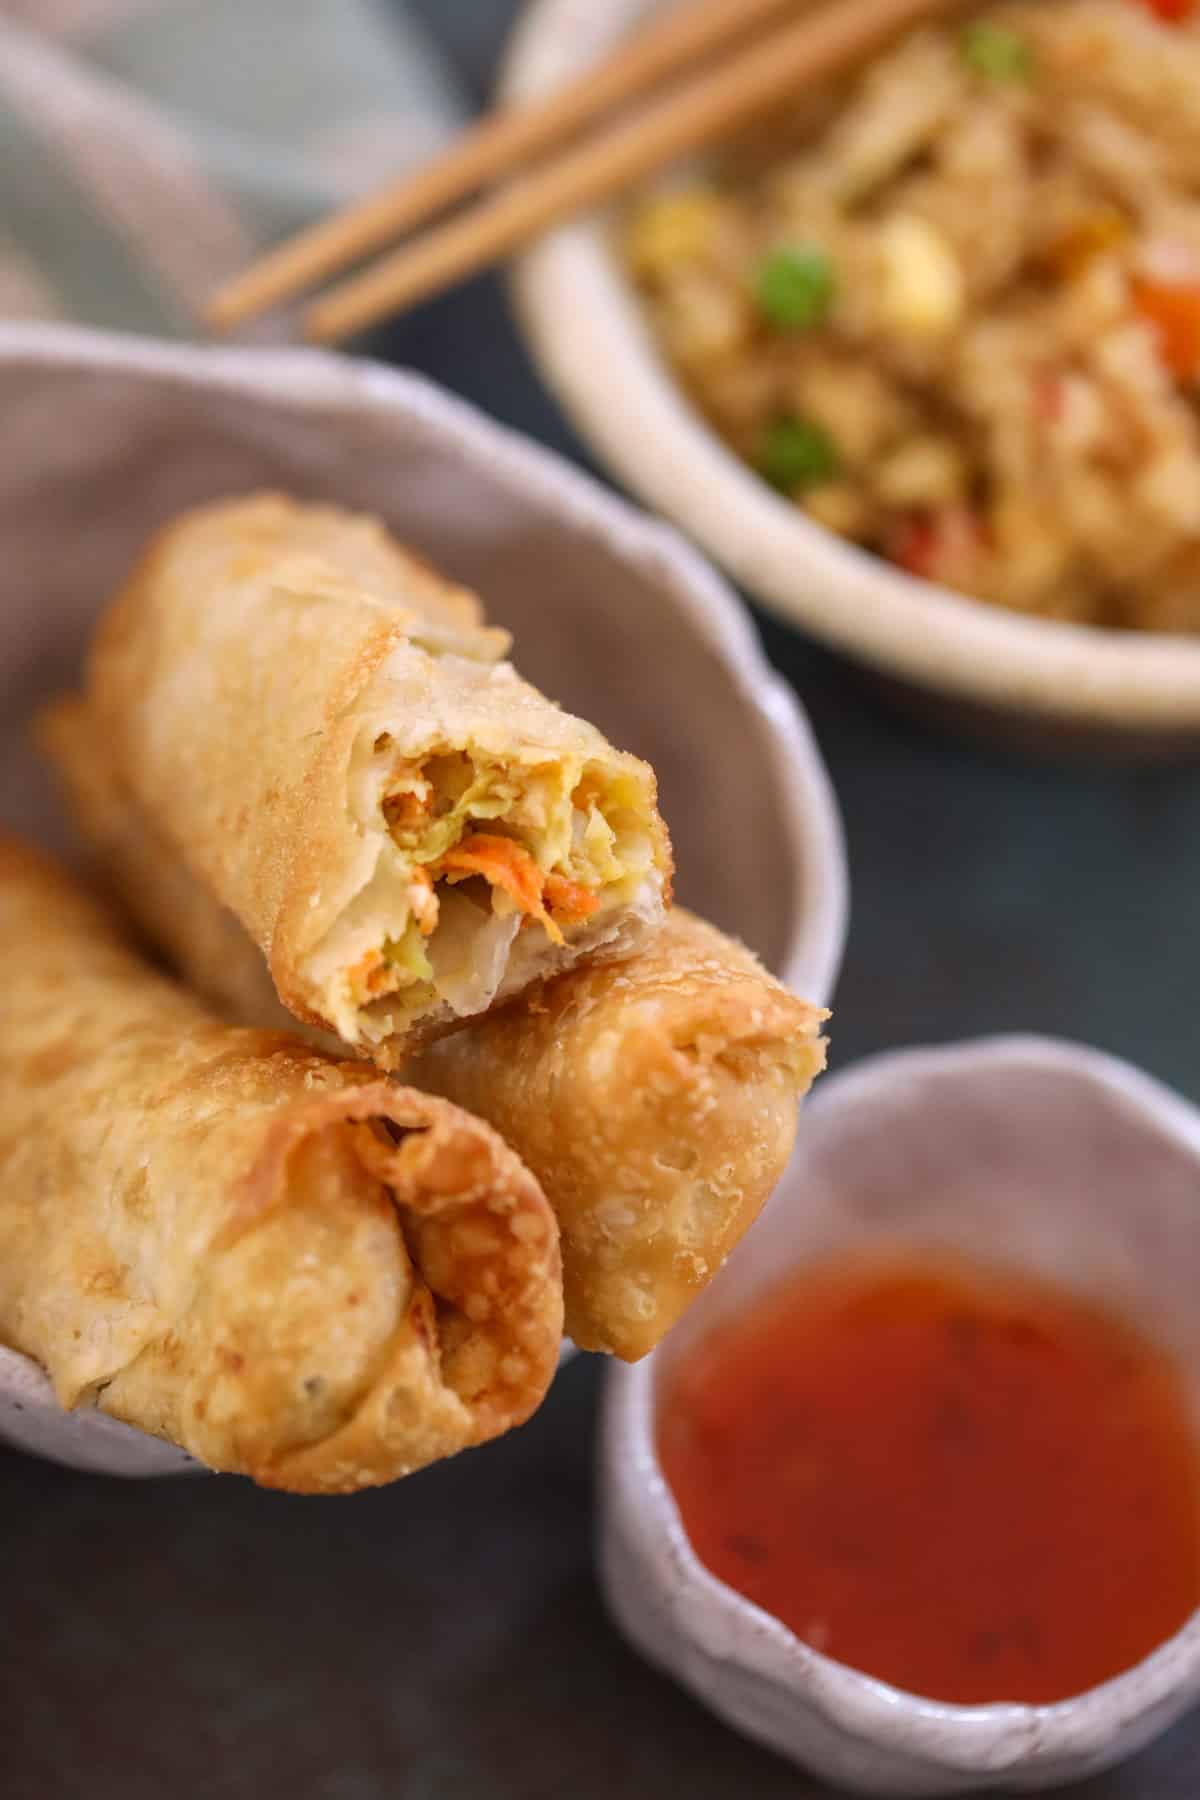 egg roll with a bite taken out